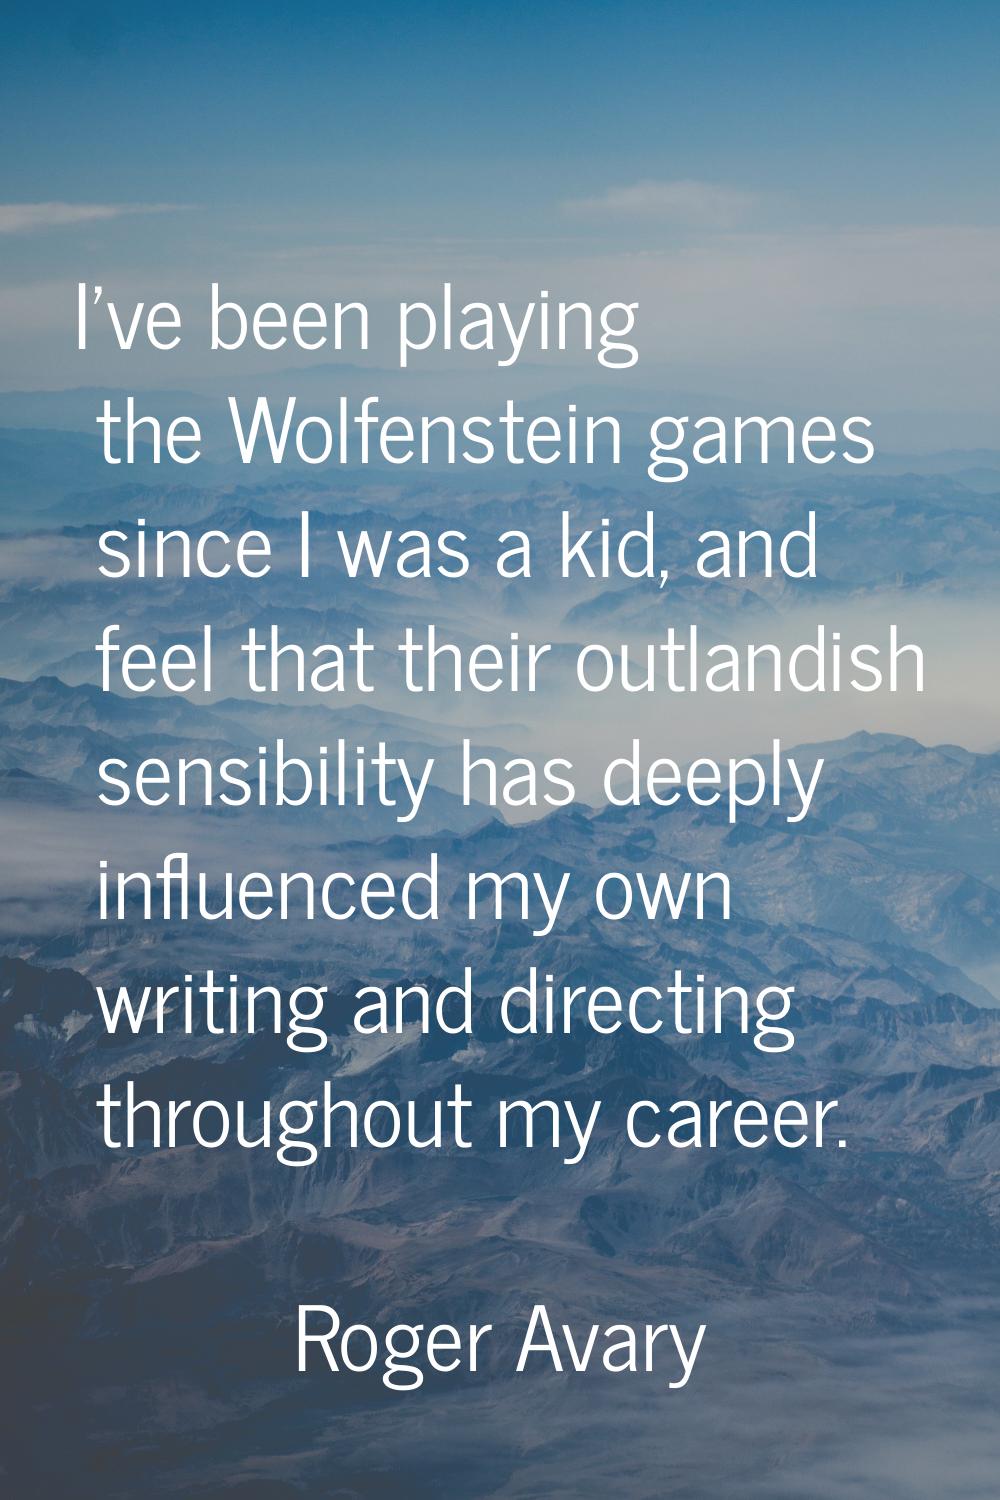 I've been playing the Wolfenstein games since I was a kid, and feel that their outlandish sensibili